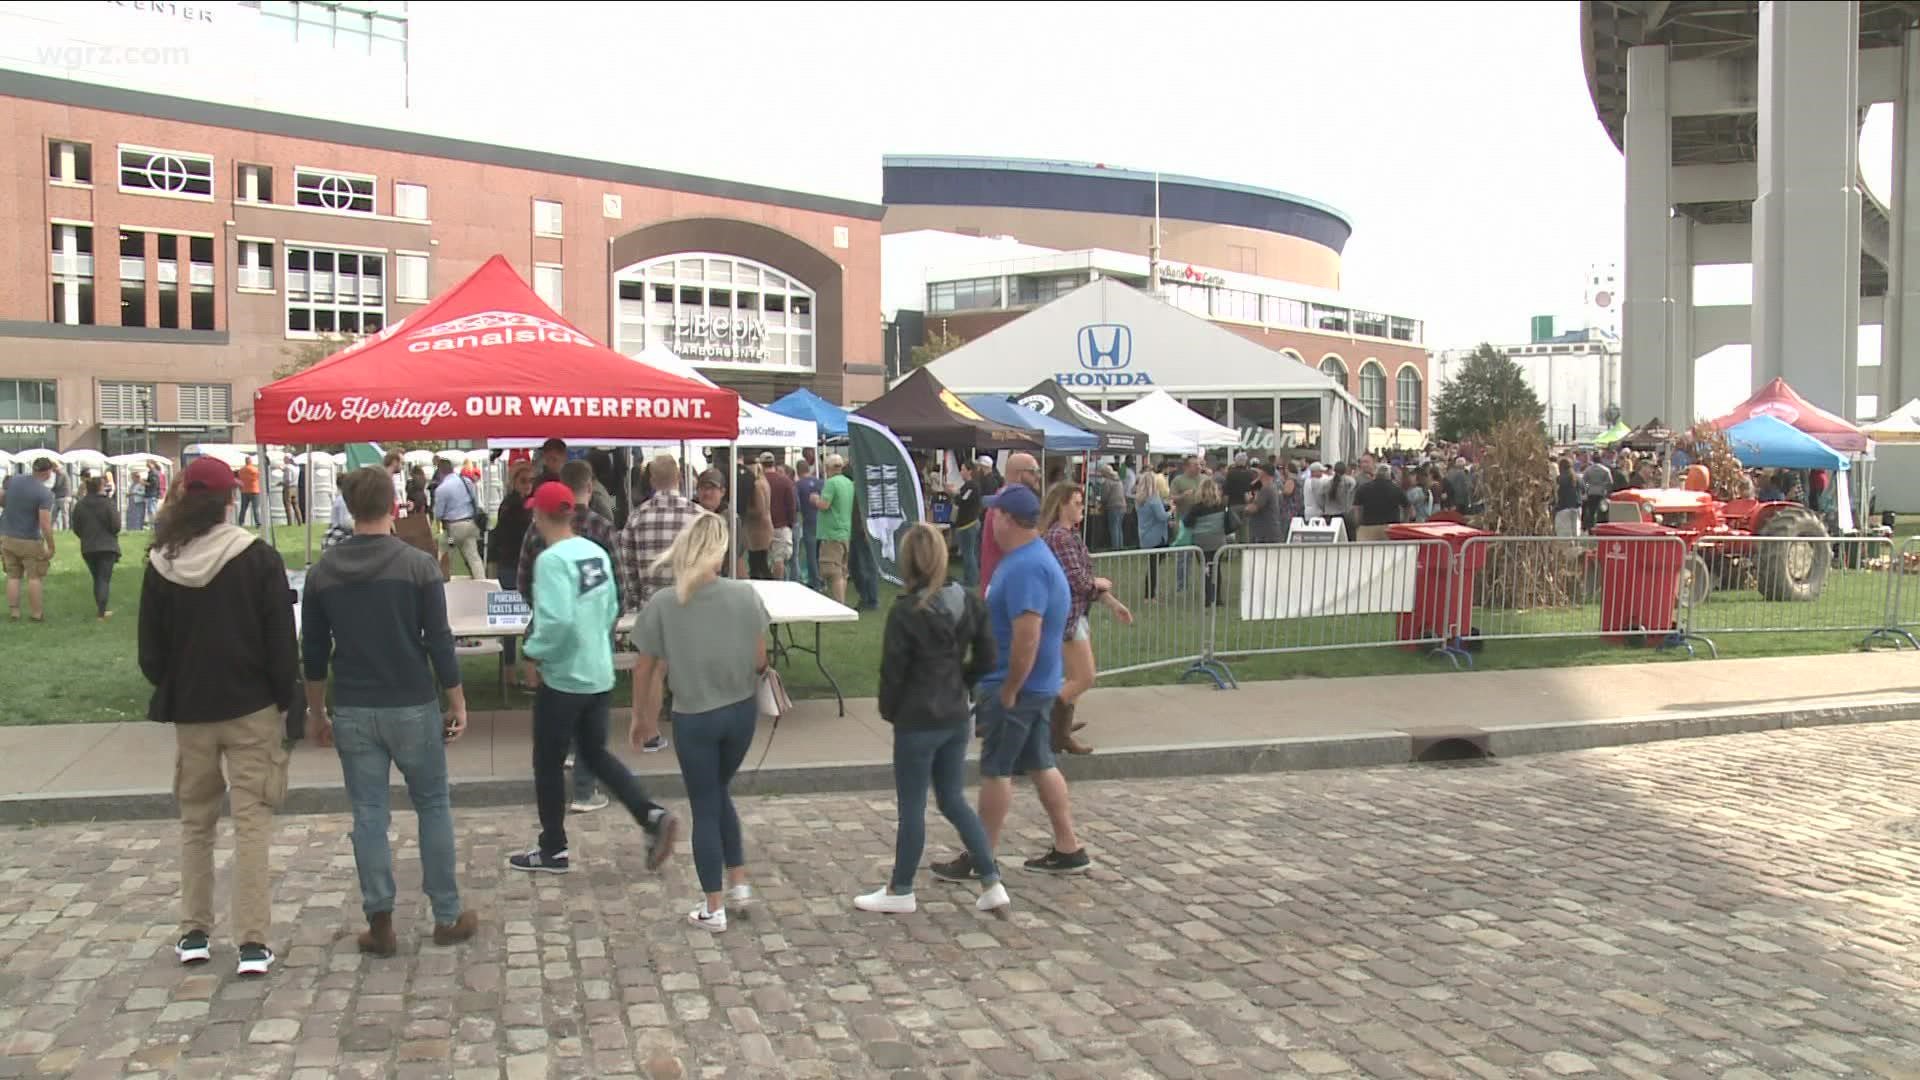 The New York State Craft Brewers Festival made its return to Western New York. There were more than 50 breweries from all across the state at the event.